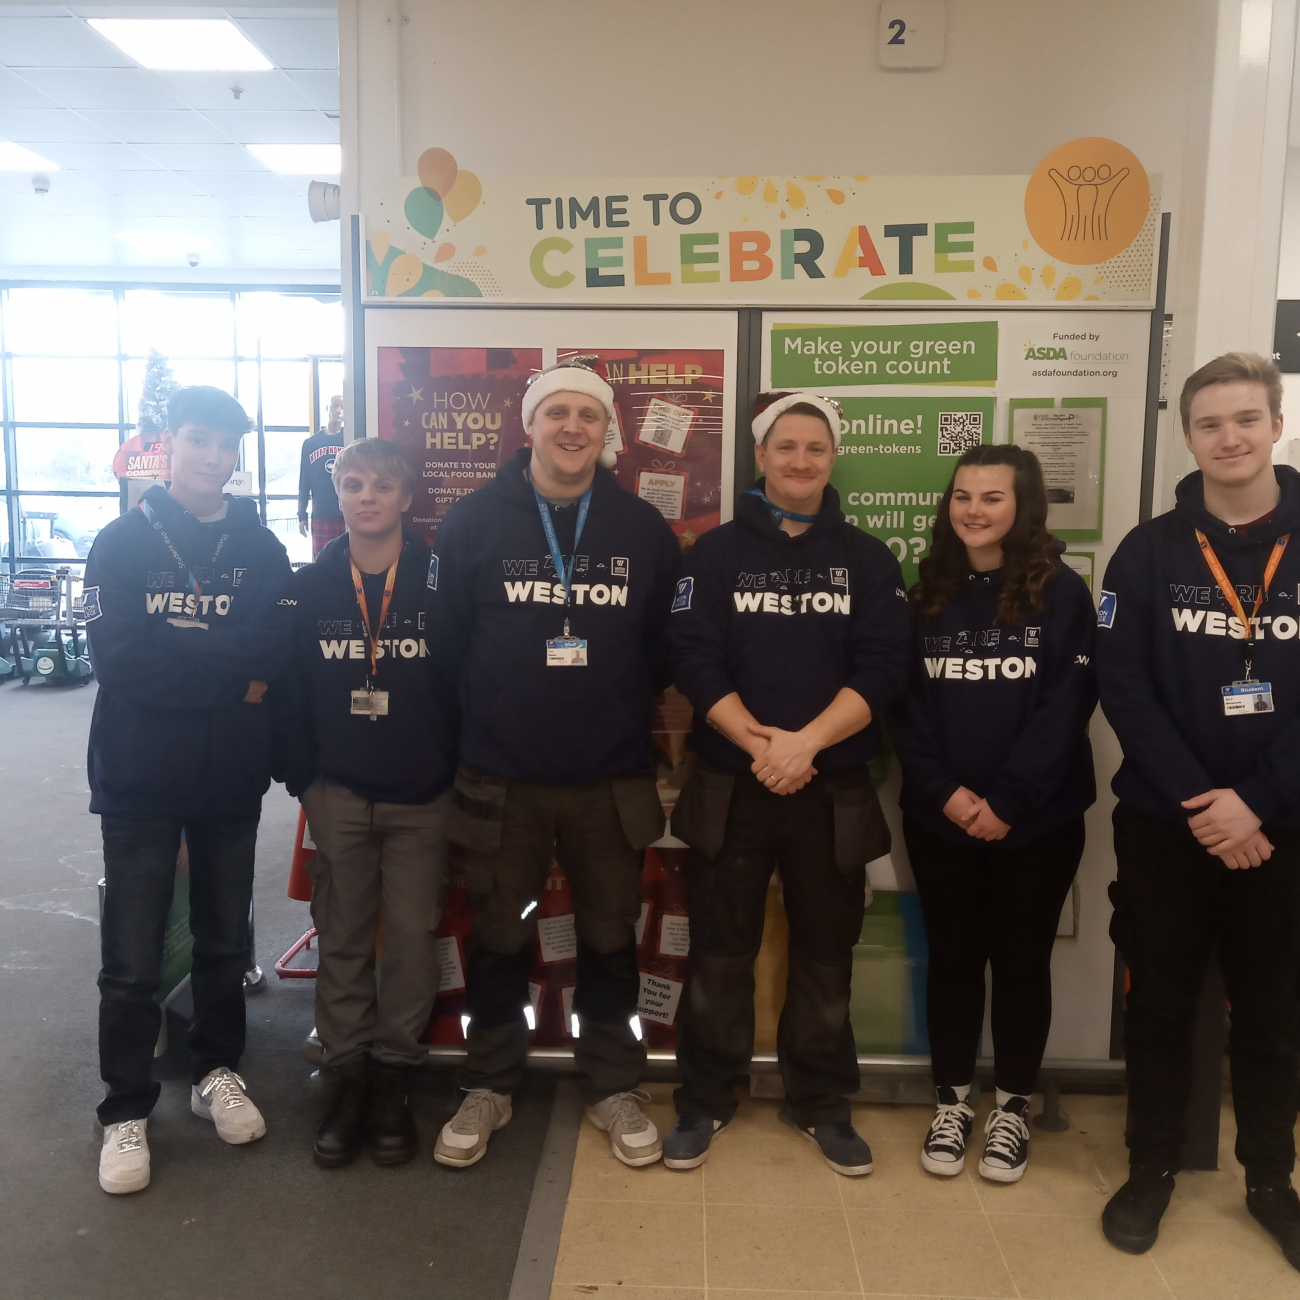 Learners smiling whilst supporting community at Asda